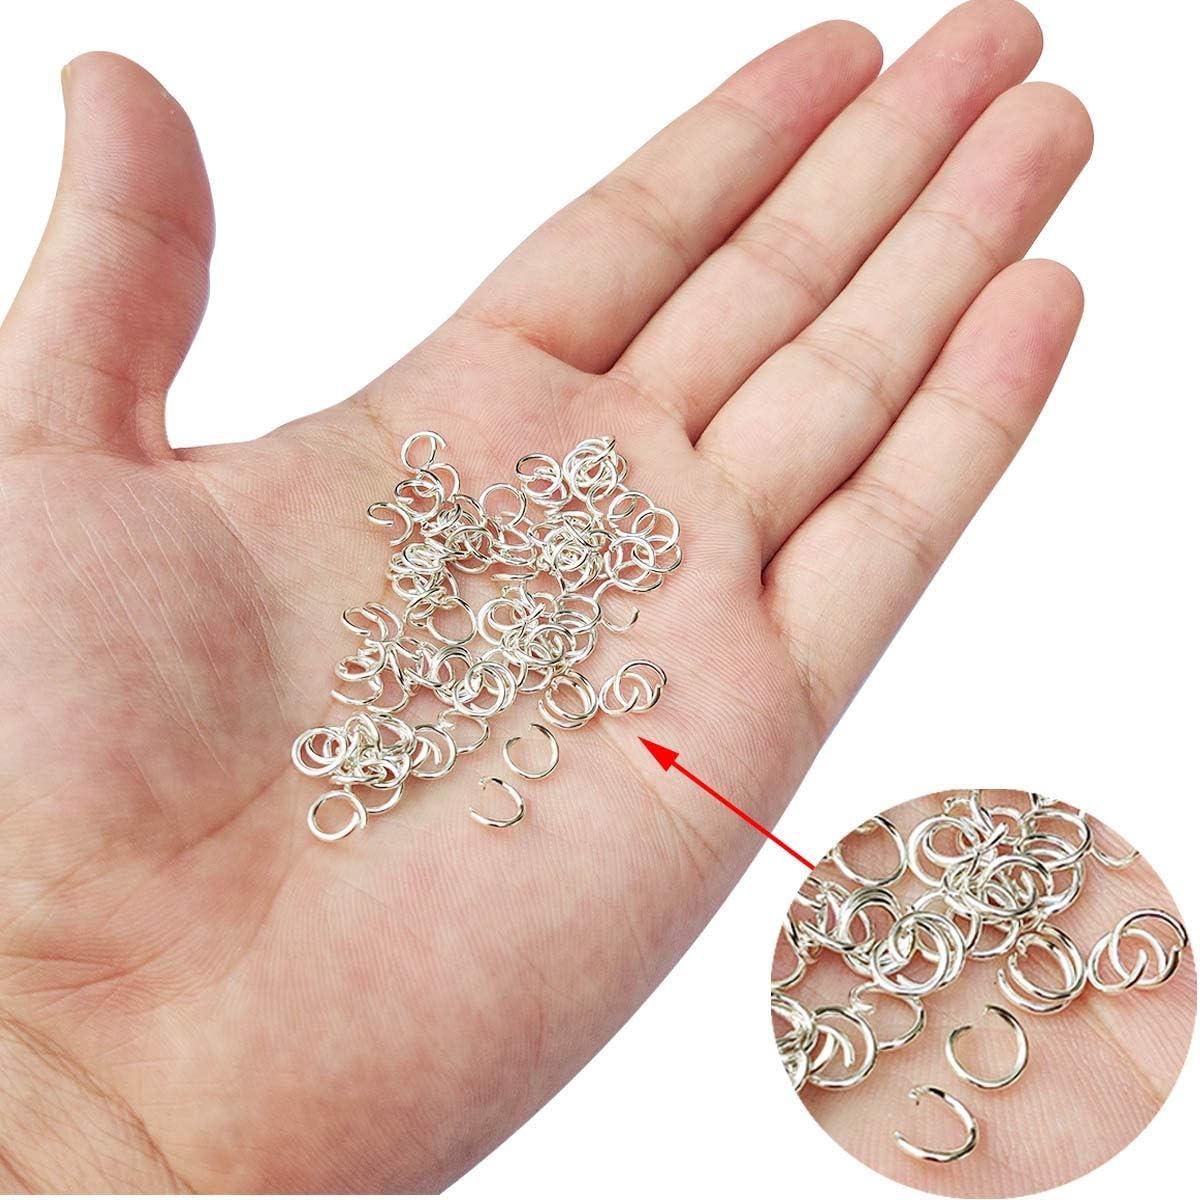 600 Pcs Silver Plated Jump Rings Split Rings Circle Clasp Connecting Rings  Jewelry Necklace Bracelet Pendant Choker Charm Loops DIY Craft Earring  Making Supplies (6 mm)